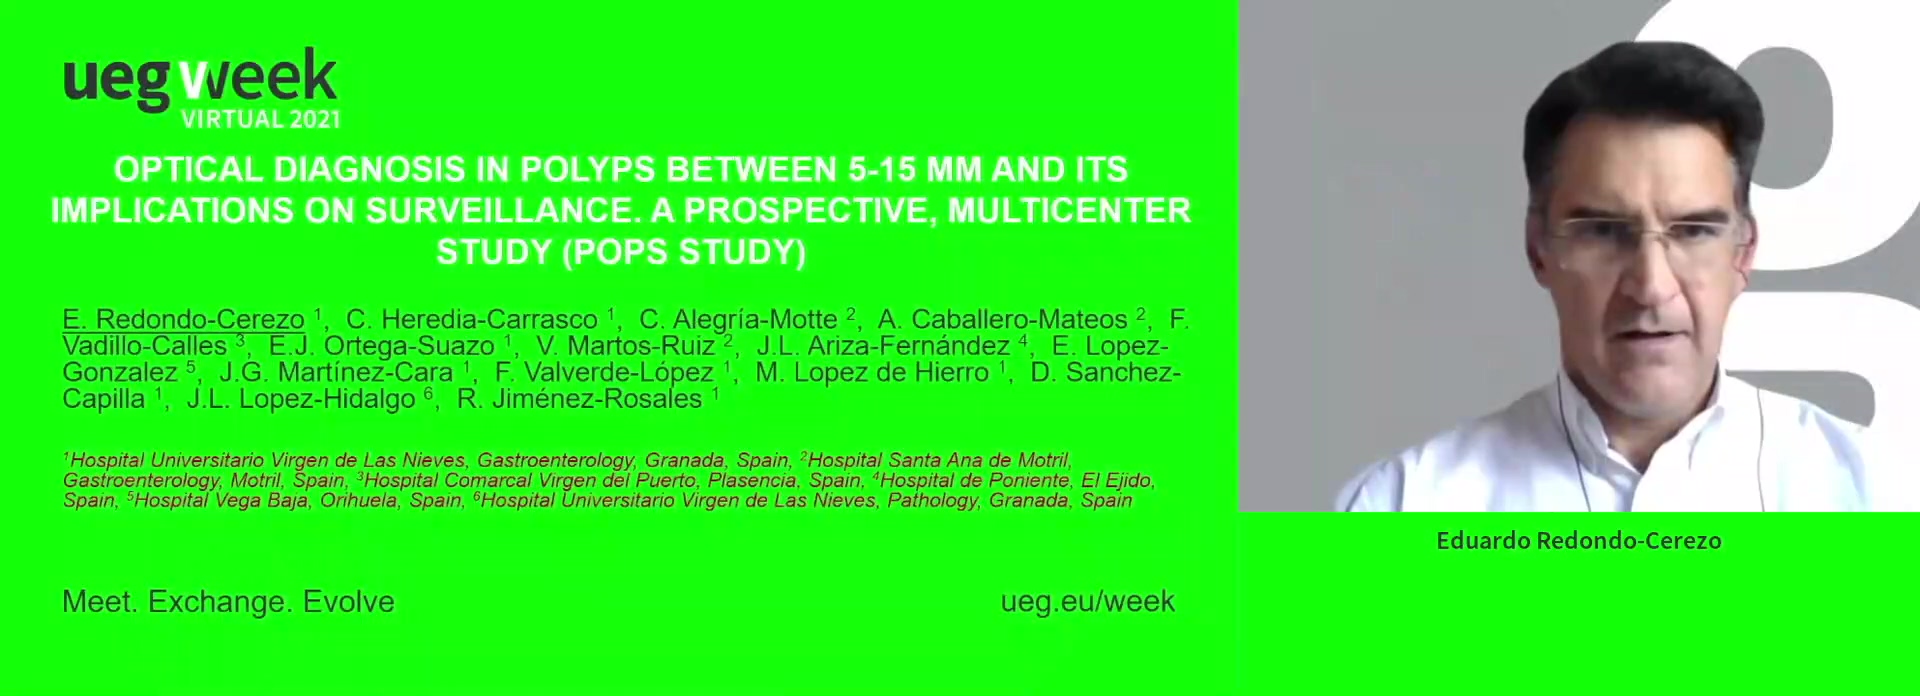 OPTICAL DIAGNOSIS IN POLYPS BETWEEN 5-15 MM AND ITS IMPLICATIONS ON SURVEILLANCE. A PROSPECTIVE, MULTICENTER STUDY. (POPS STUDY)